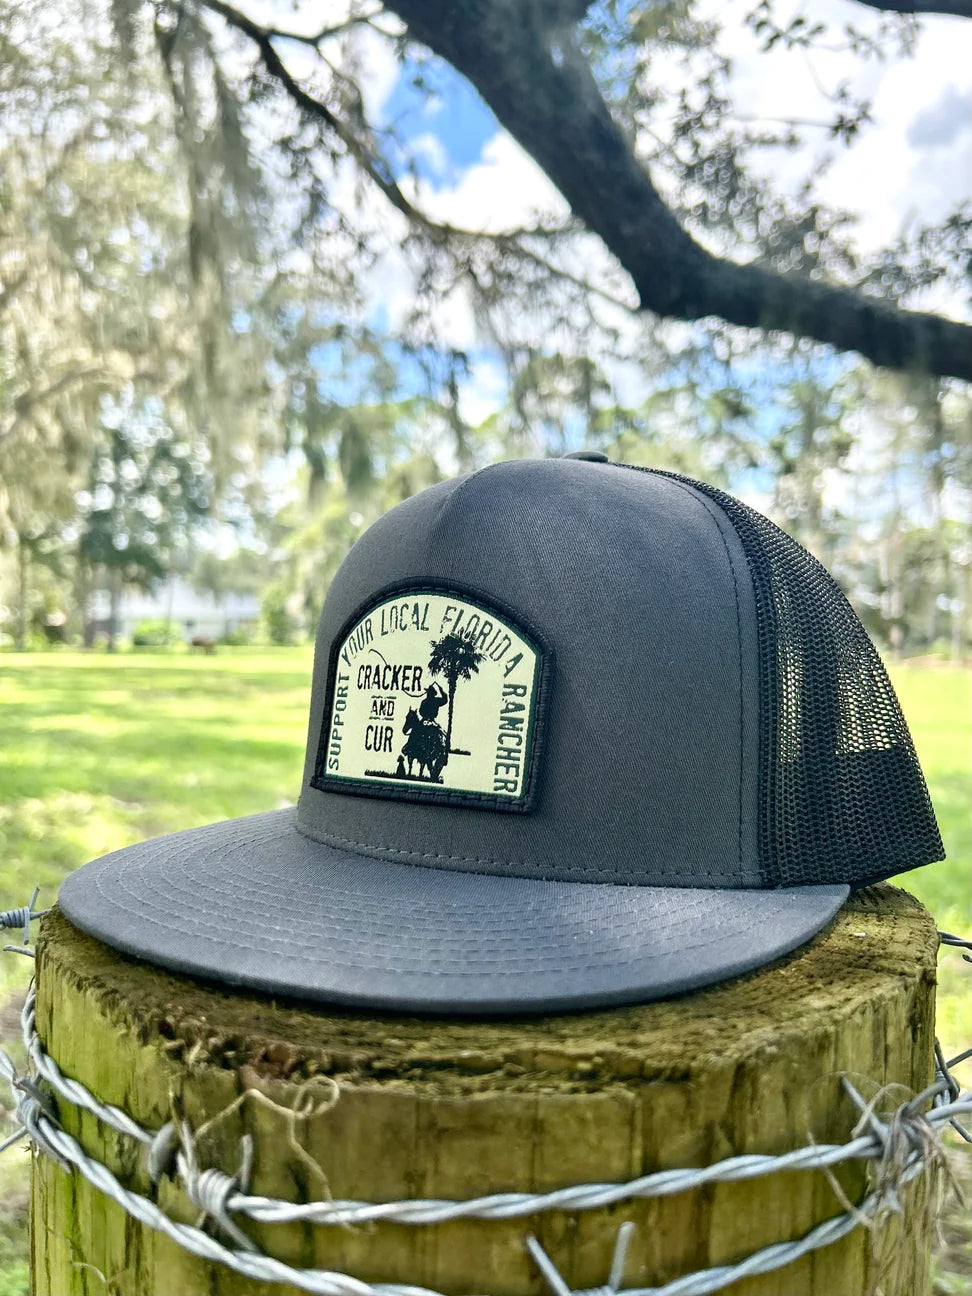 Cracker and Cur Local Florida Patch Hat - Charcoal/Black Flatbill